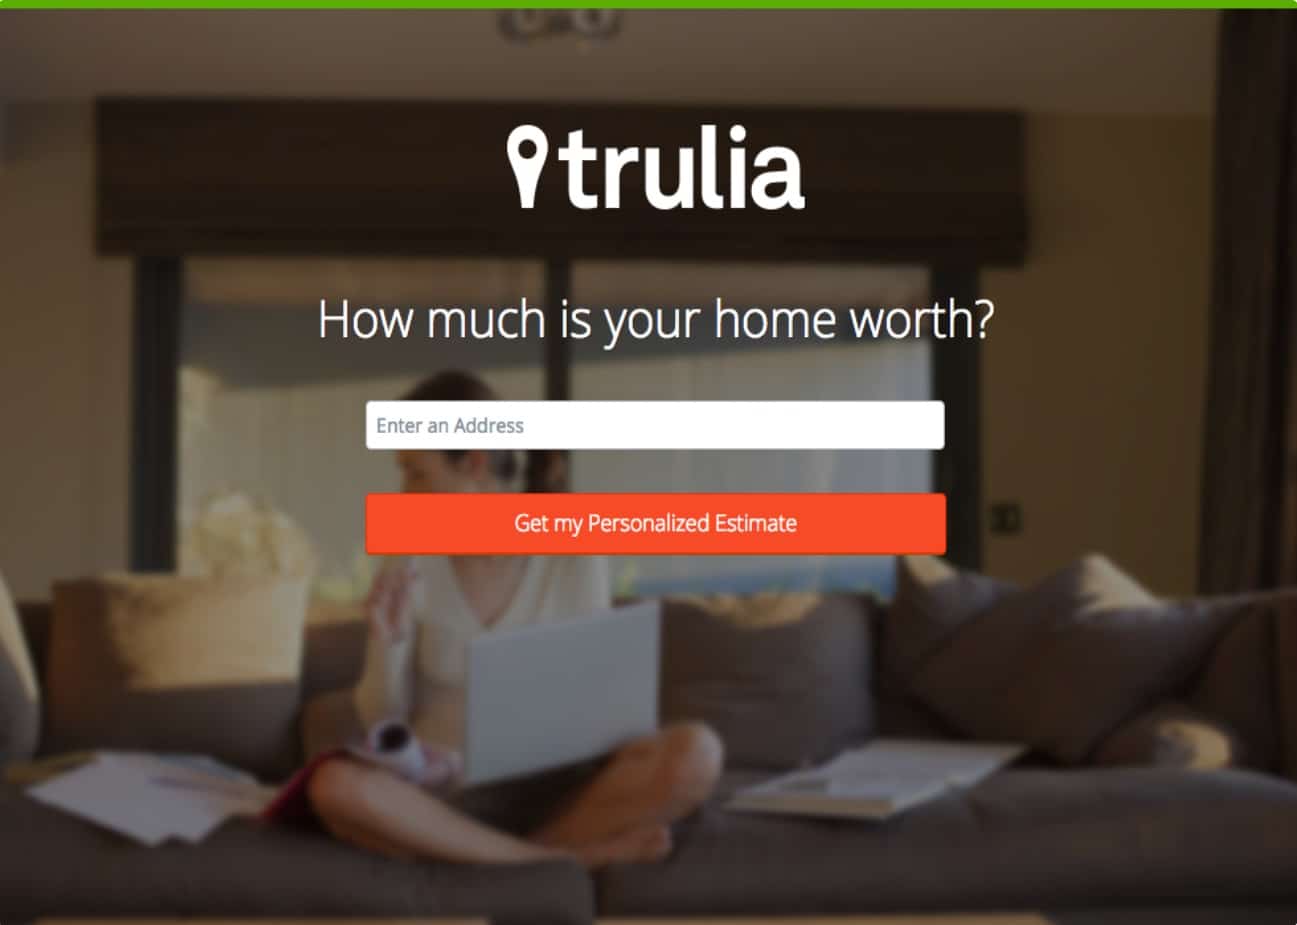 A great example of this is the opt-in landing page for popular real estate listing company Trulia. On their landing page, they simply ask for “an address” to start the estimation process.